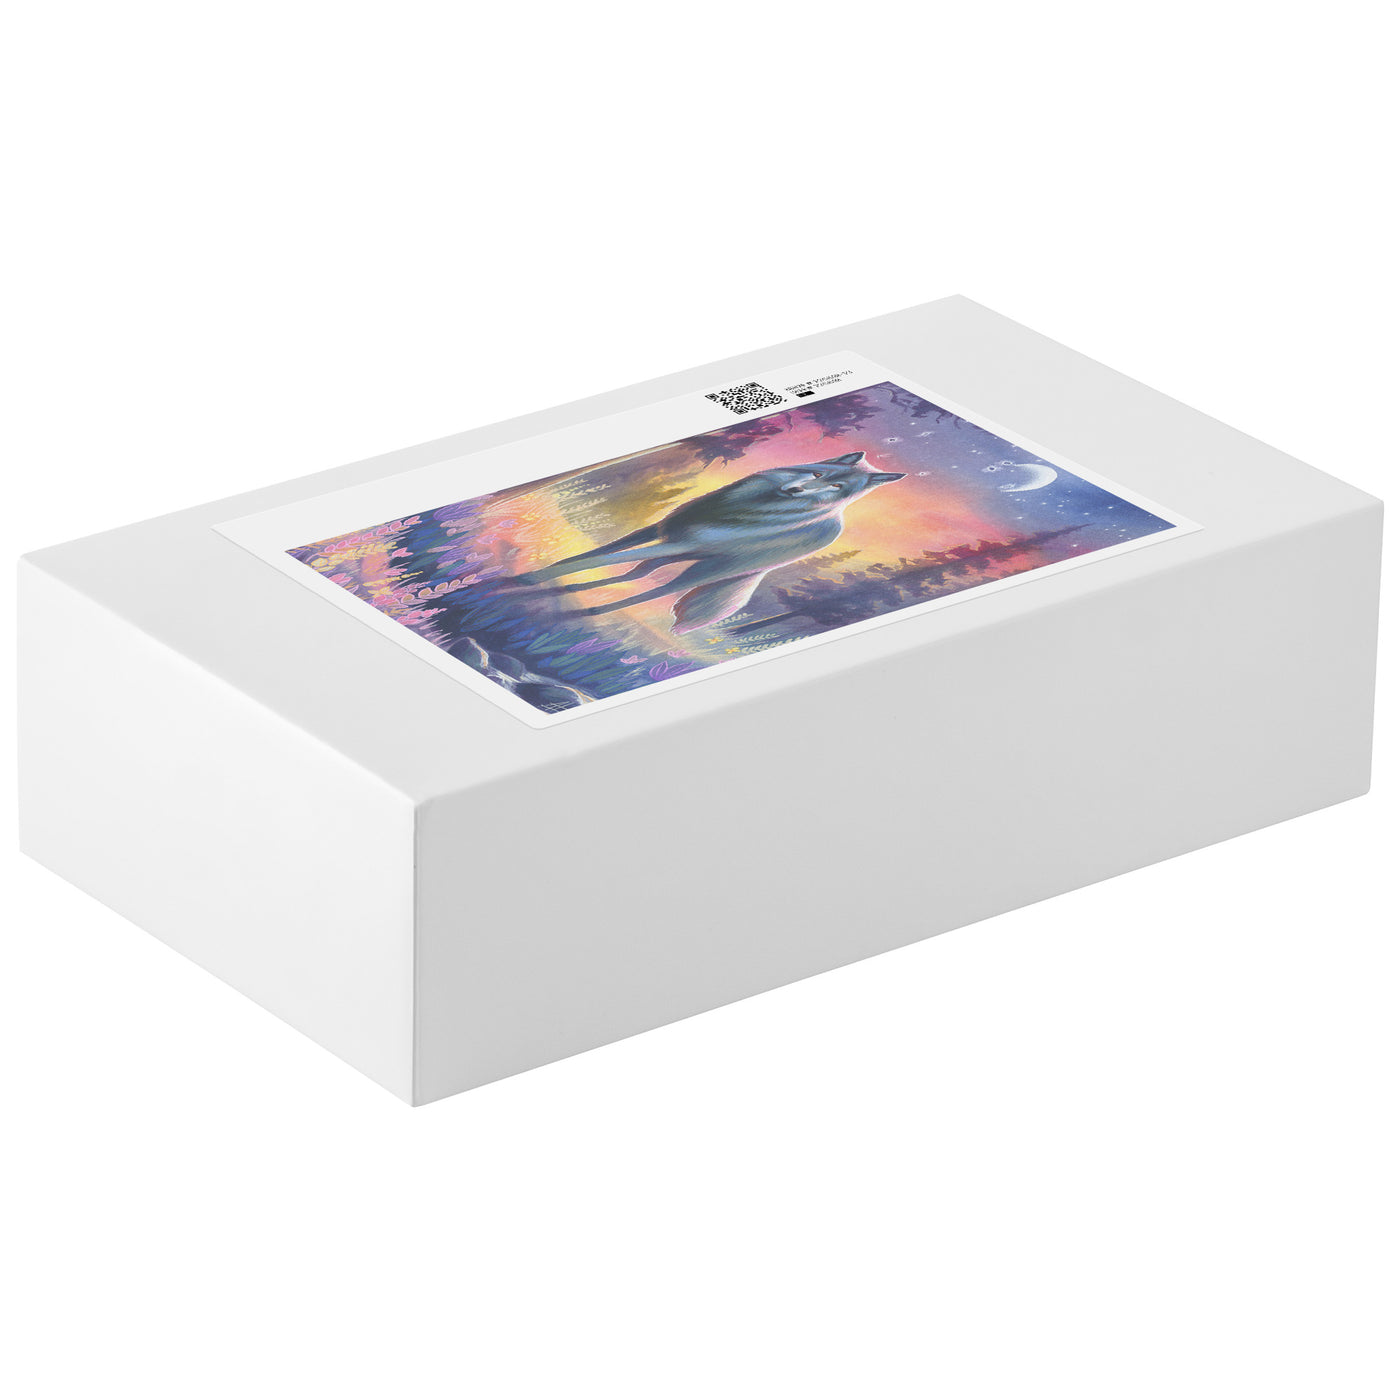 White box of a Wolf Puzzle featuring colorful artwork of a enchanted creature on its lid.